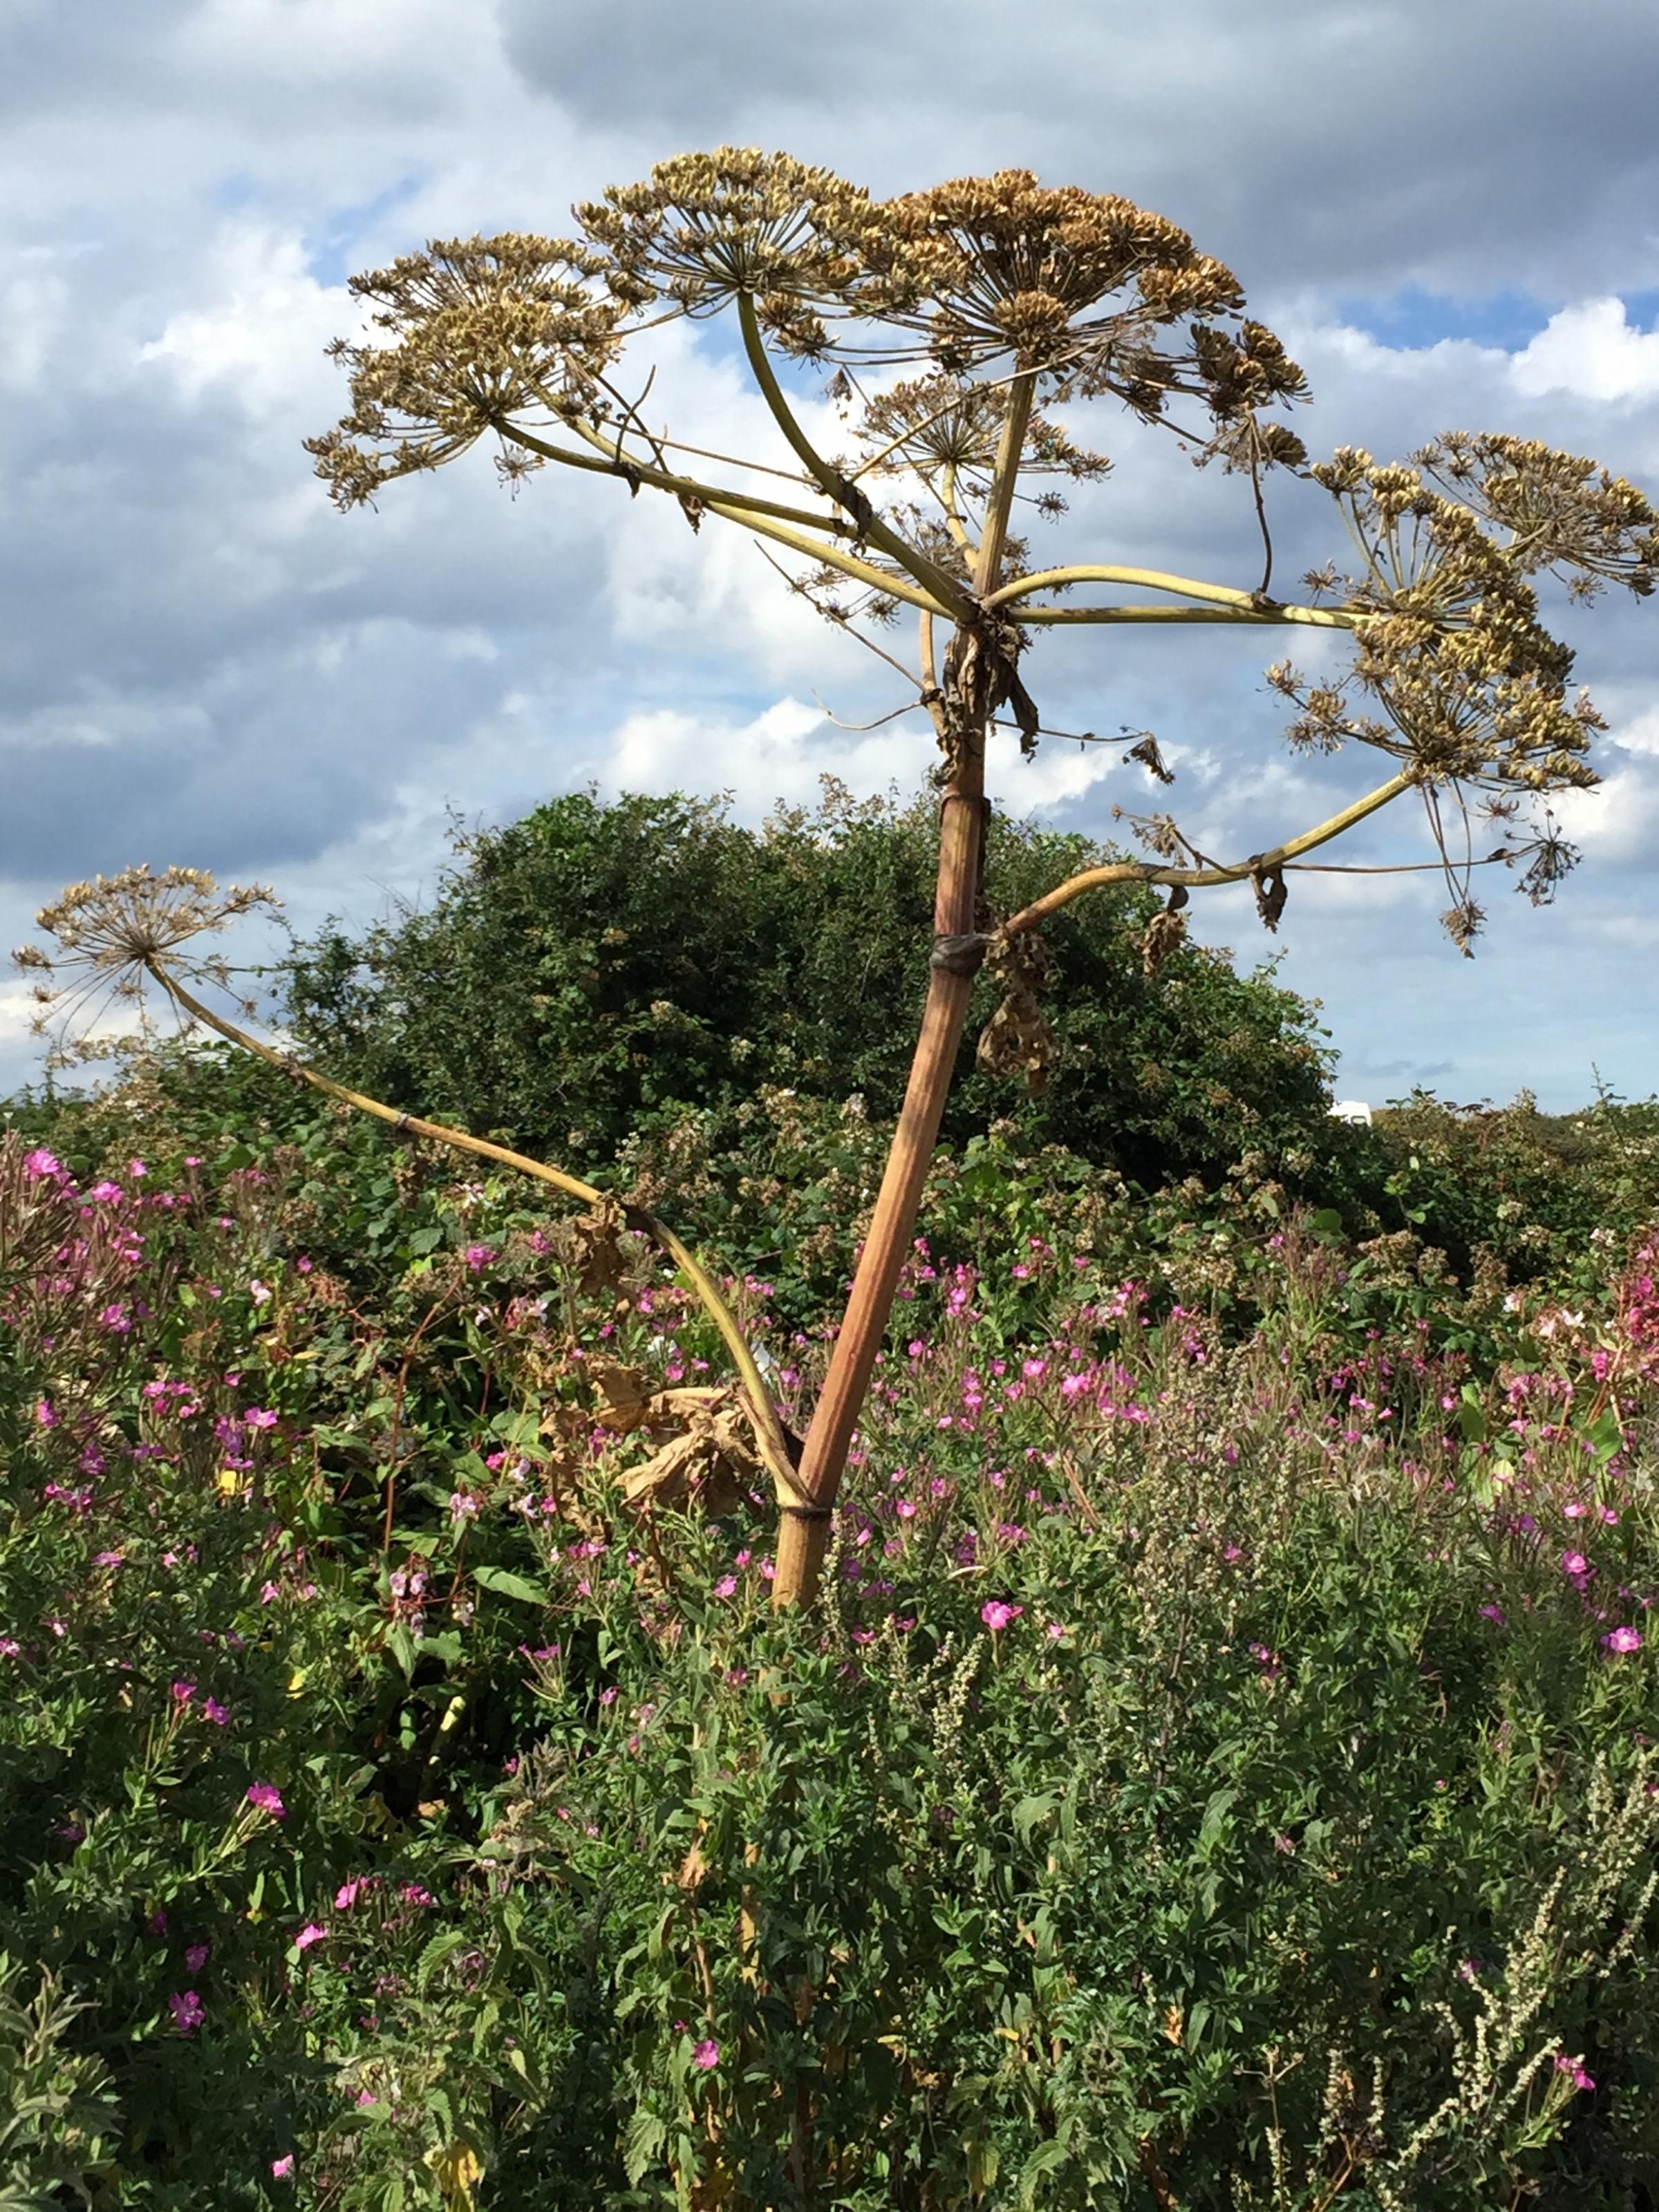 Warning issued over dangers of Giant Hogweed